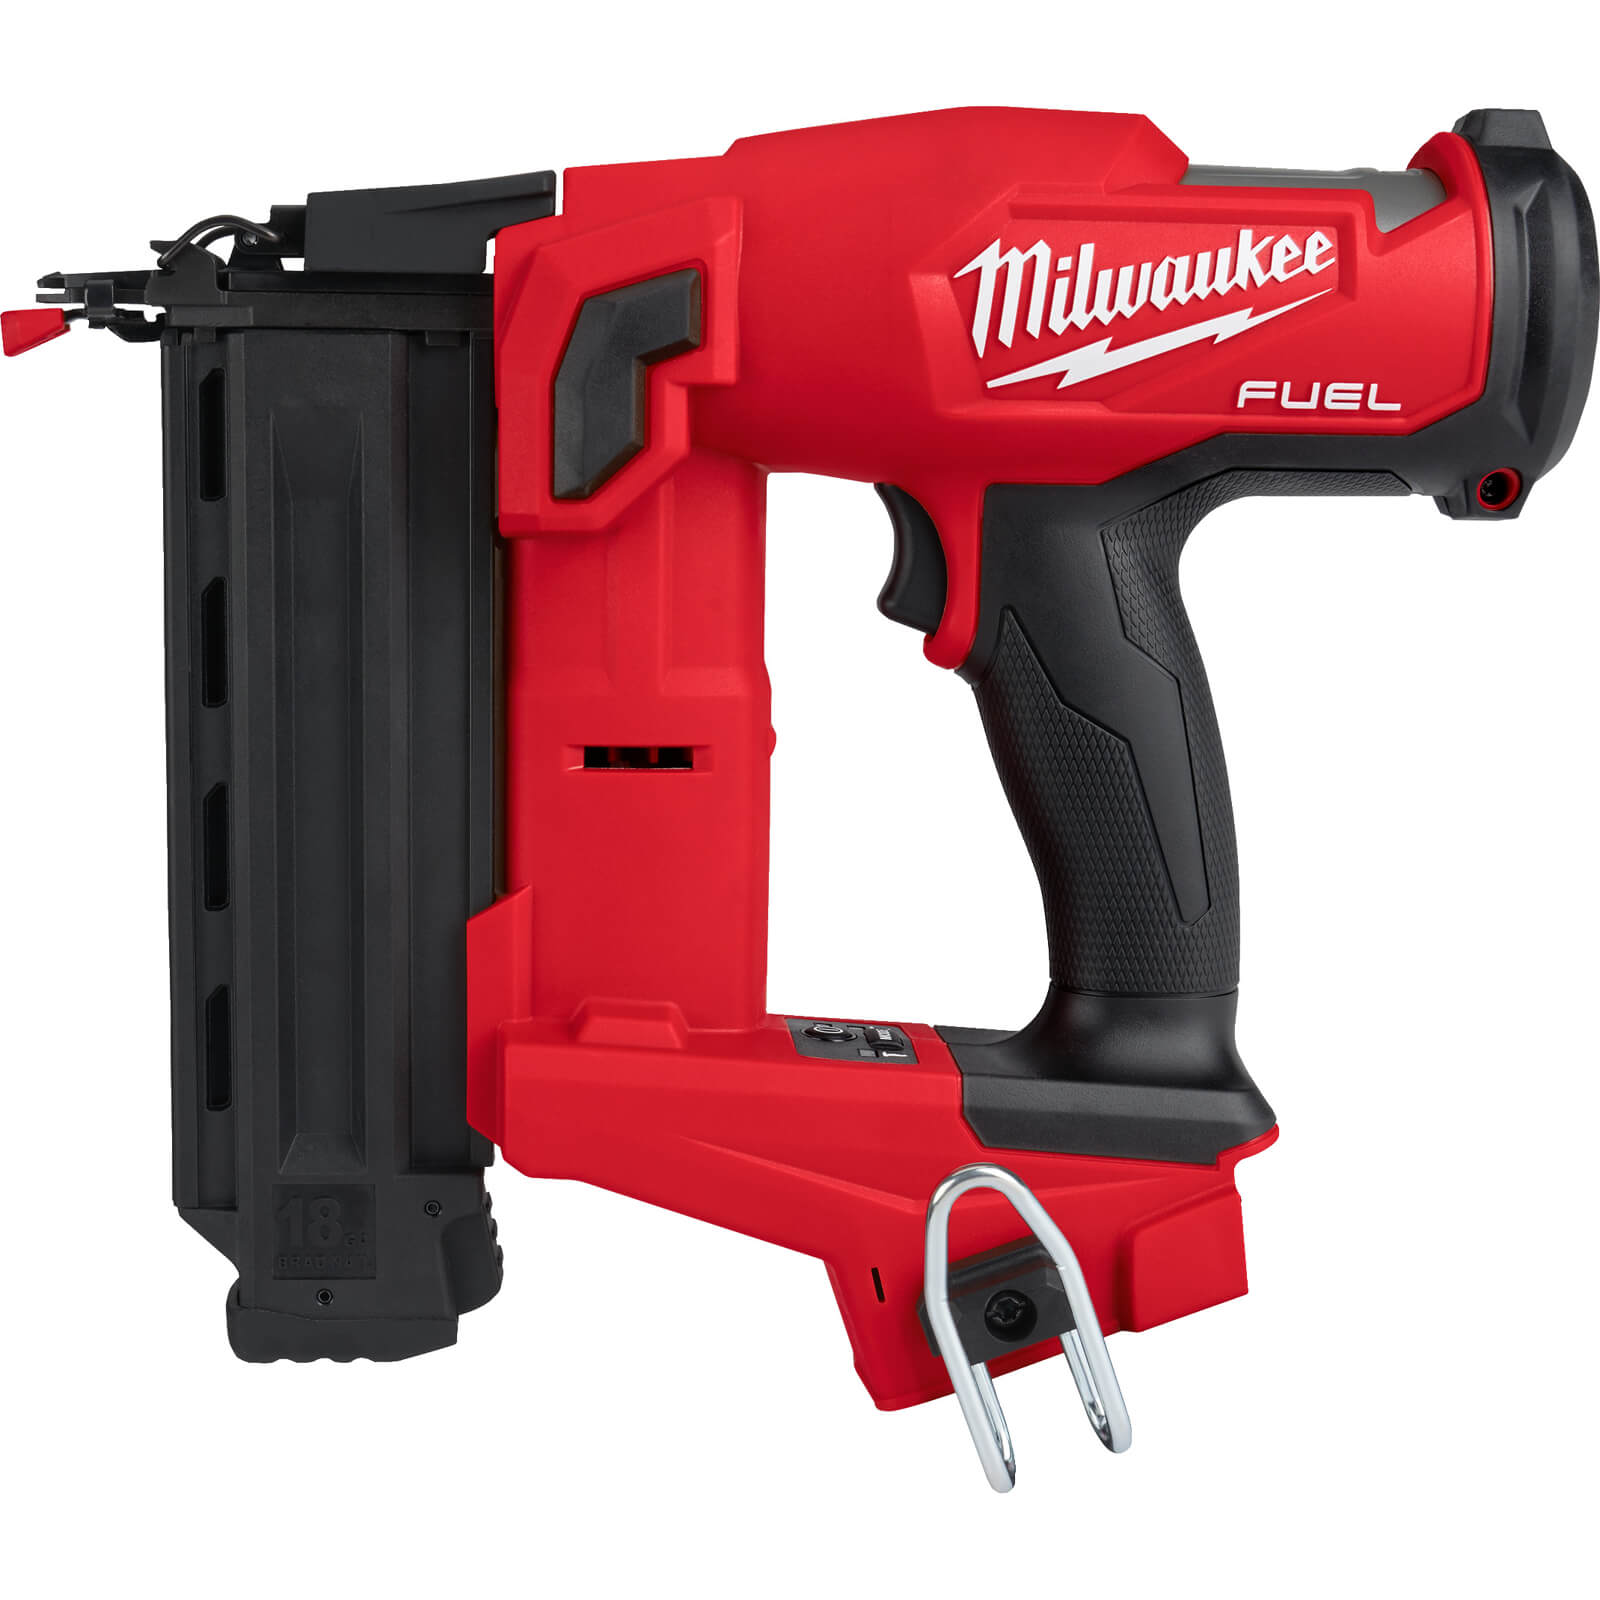 Milwaukee M18 FN18GS Fuel 18v Cordless Brushless 18 Gauge Finish Nail Gun No Batteries No Charger Case